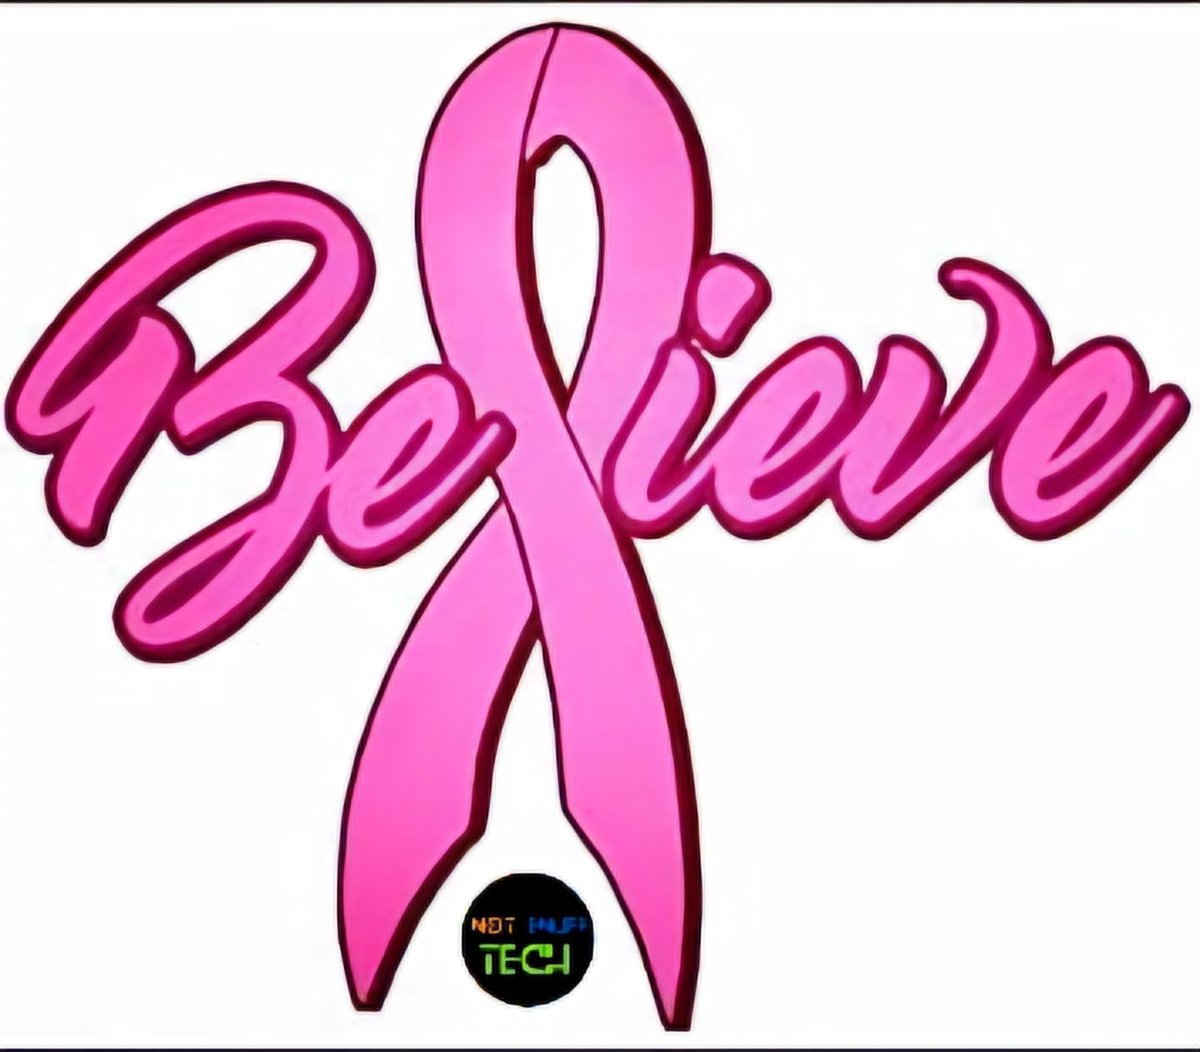 🗣 Every day is #breastcancerawareness #month #mammograms #earlydetection saves lives #TimeForChange #getinformed #geteducated #gettested #ThinkPink #LifeLessons #lovethyself #metanoia #fly #stoptheviolence #domesticviolence 🙏 💟 🎀 💟